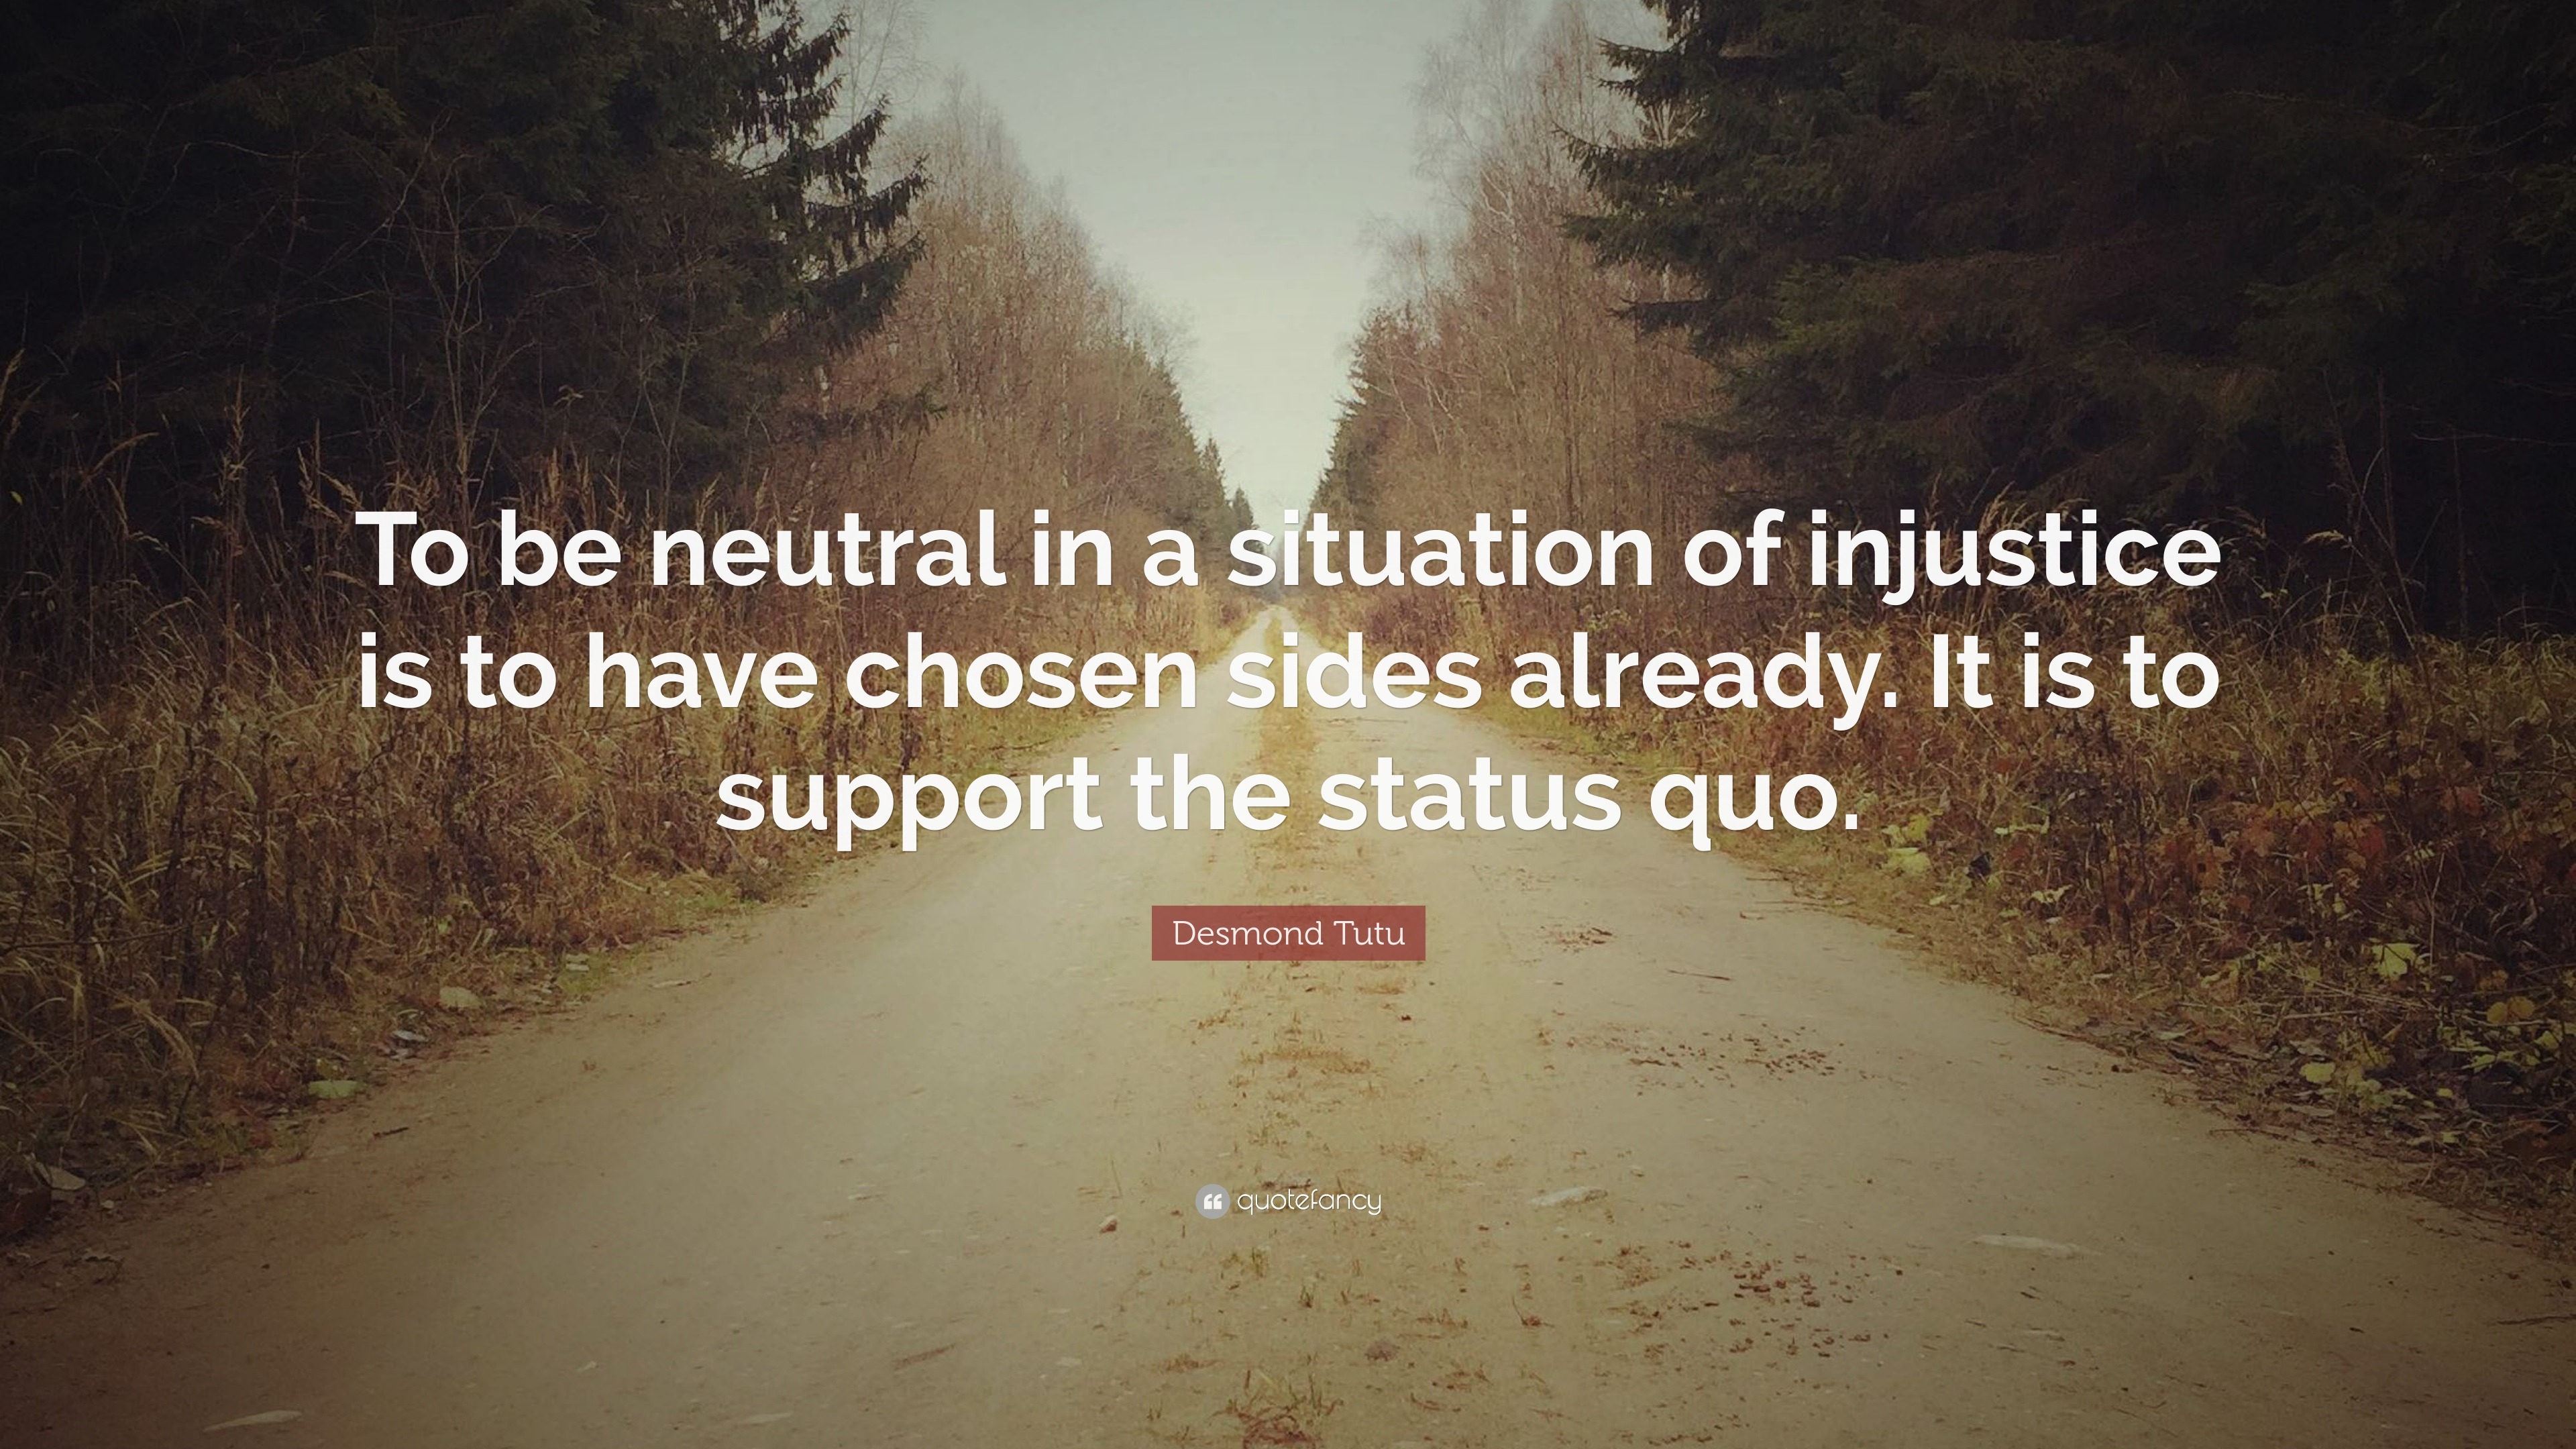 Desmond Tutu Quote “to Be Neutral In A Situation Of Injustice Is To